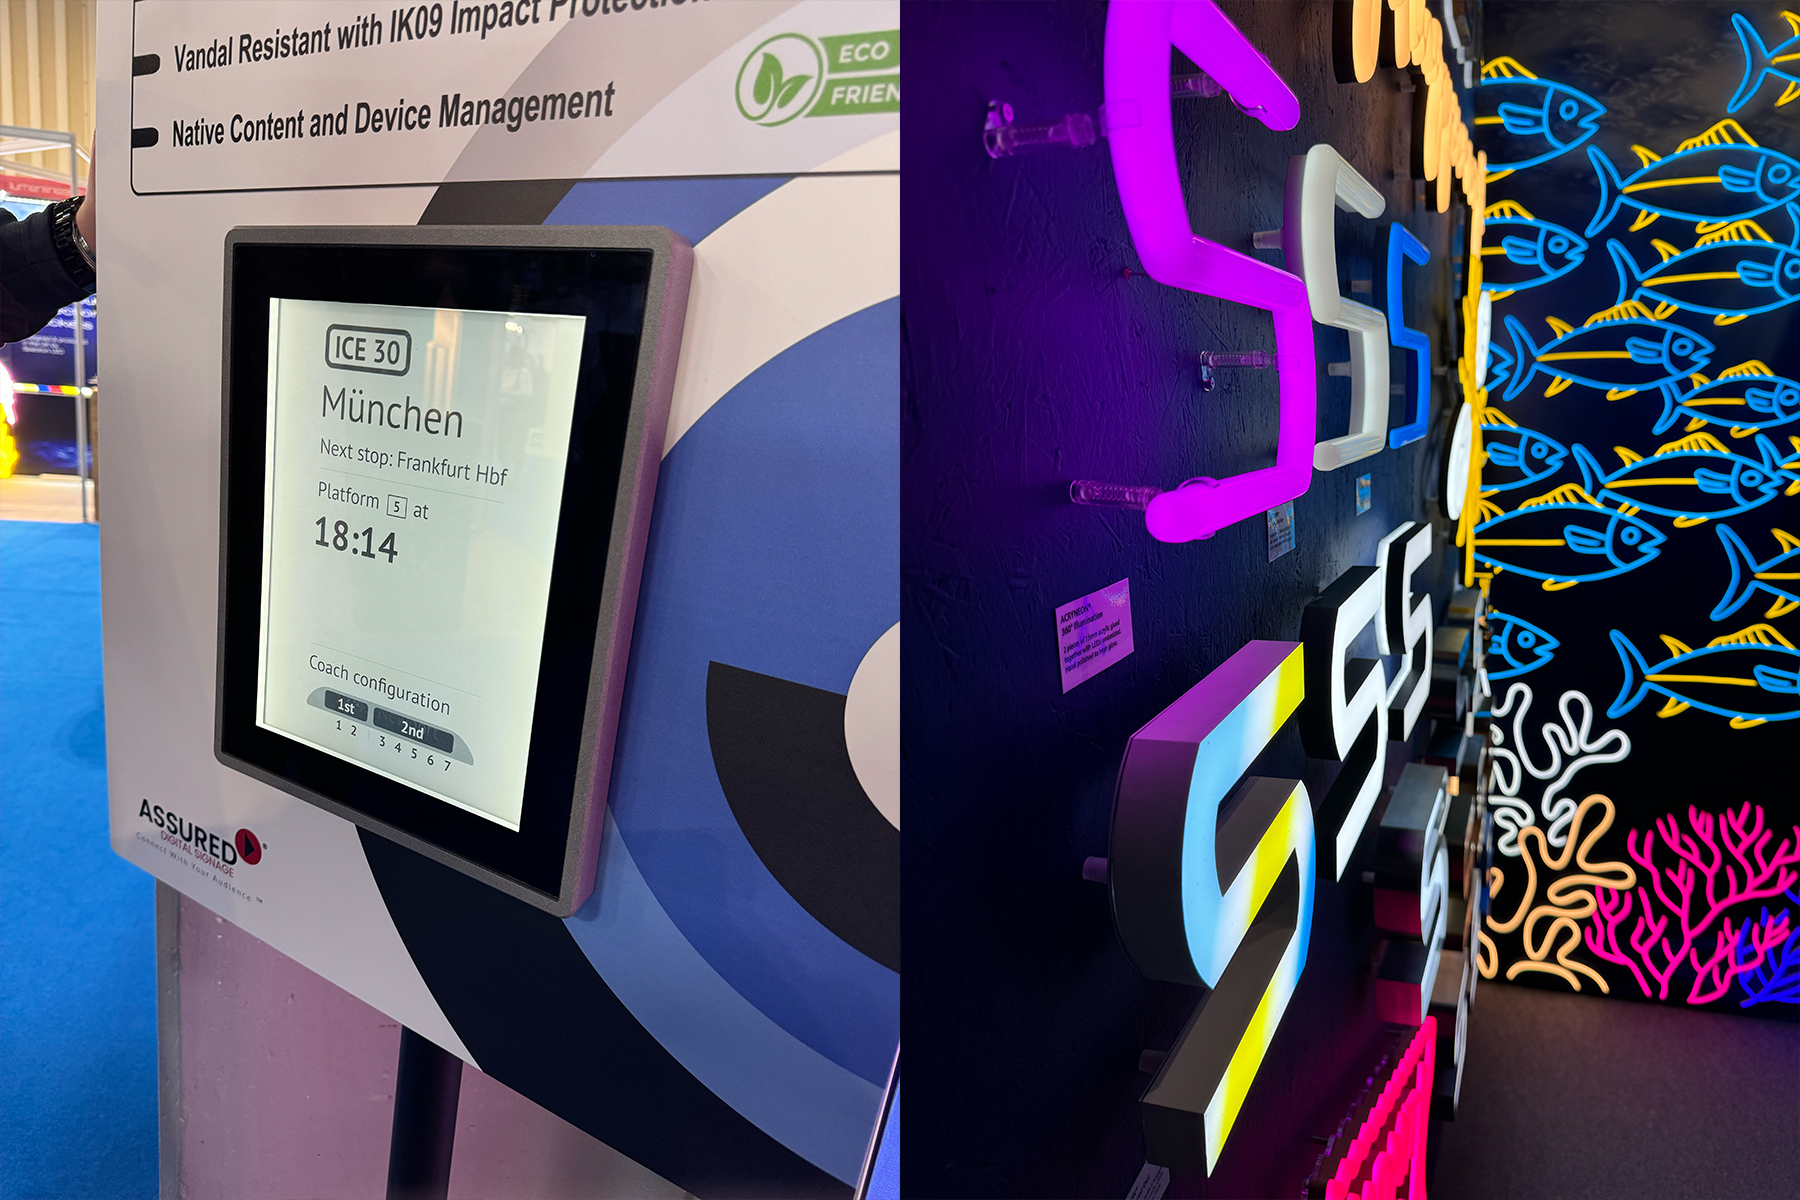 A collection of digital signs, light boxes and ceiling displays from exhibitors. New, exciting signage, as well as basic hospitality staples.